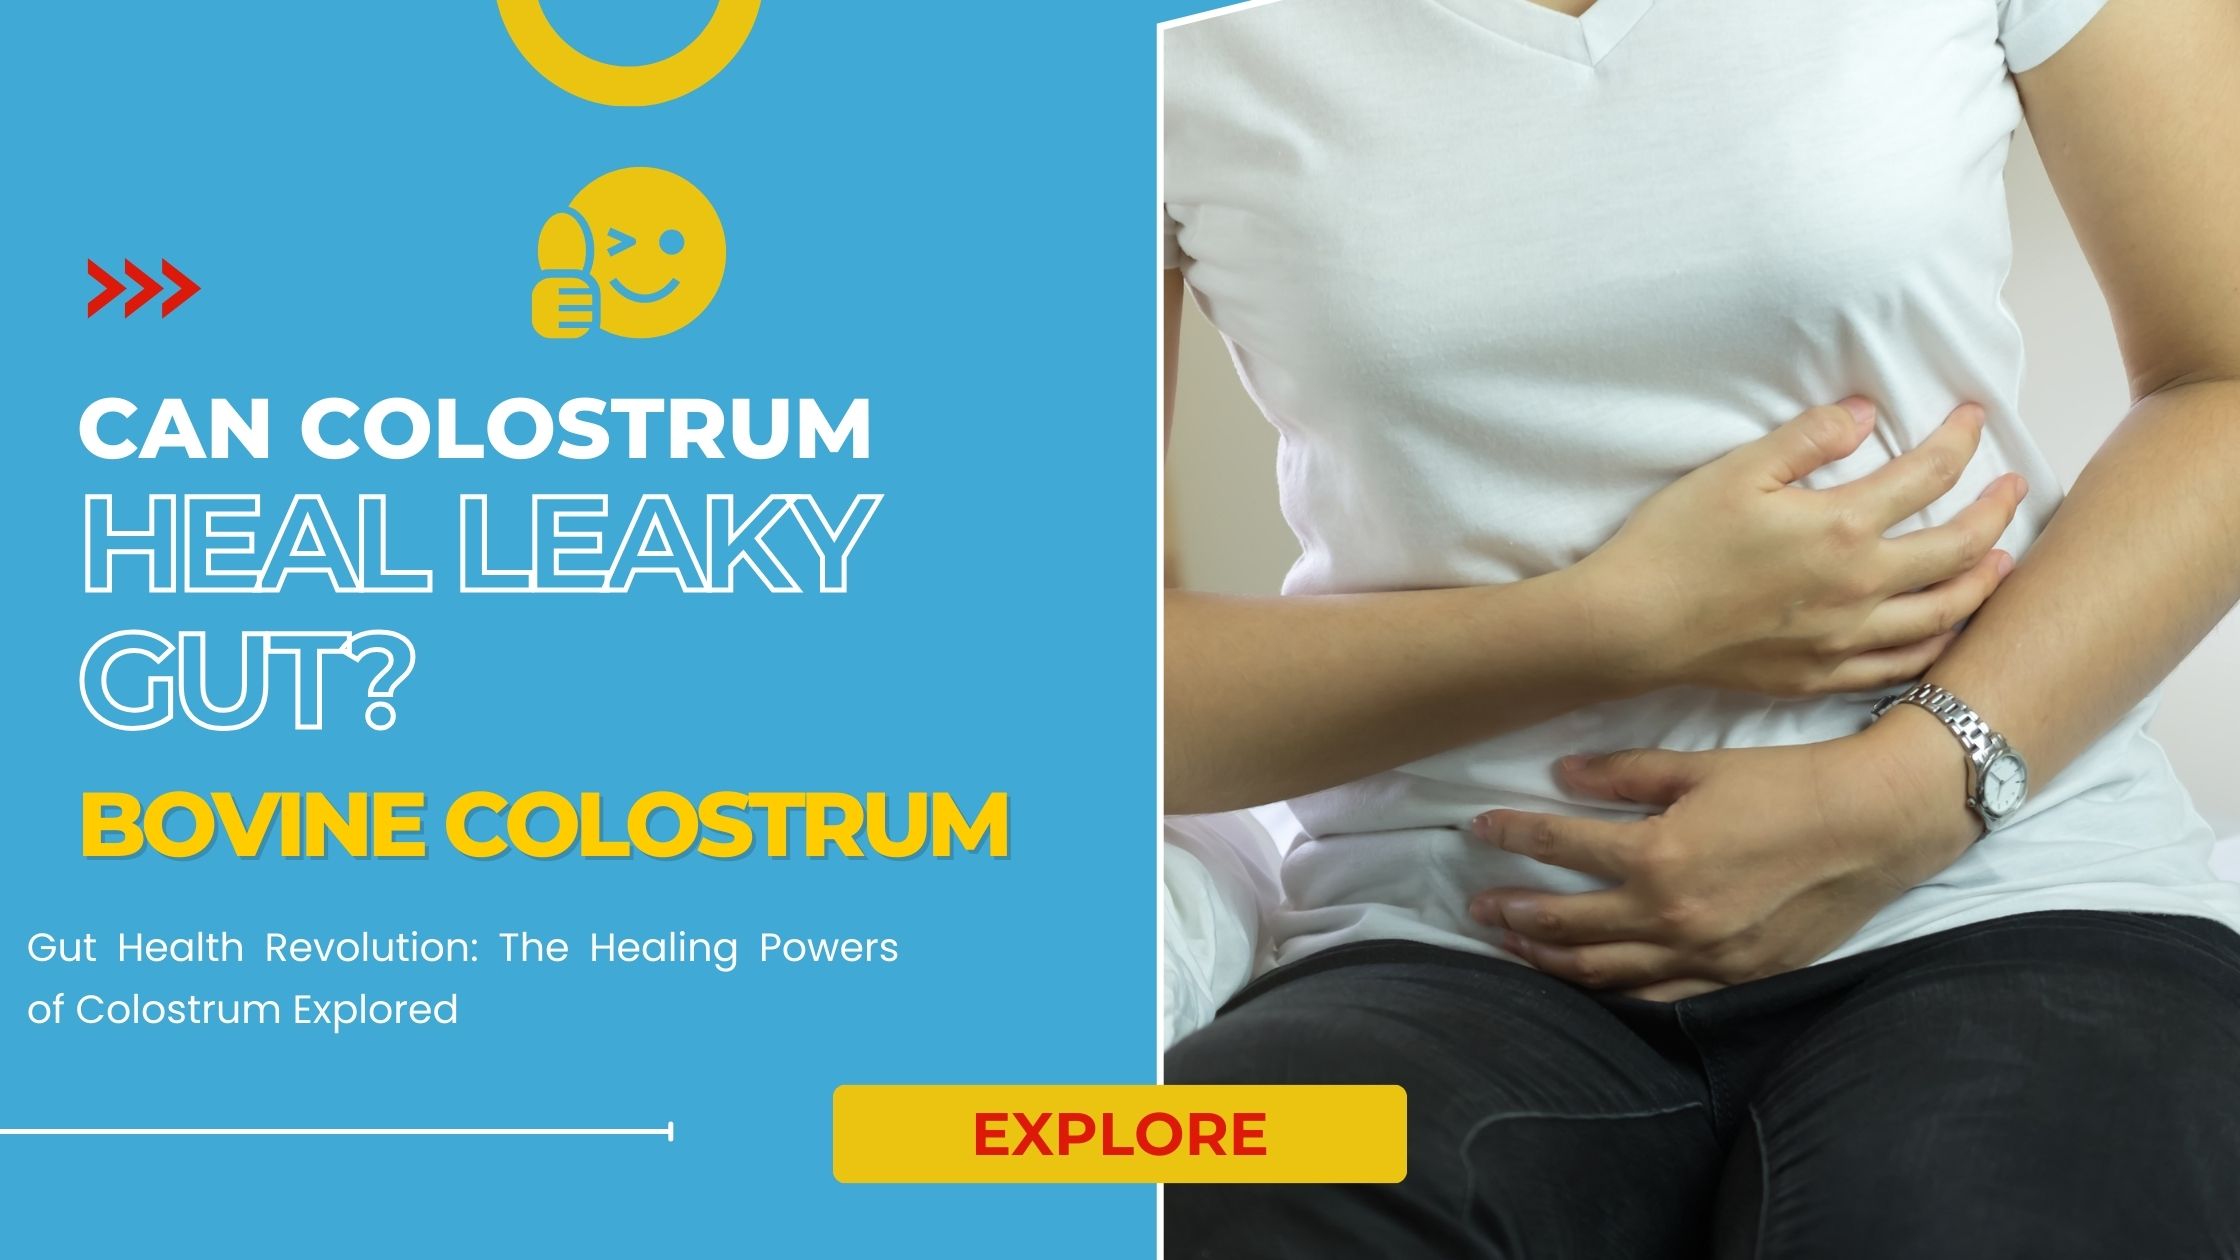 Colostrum Heal Leaky Gut